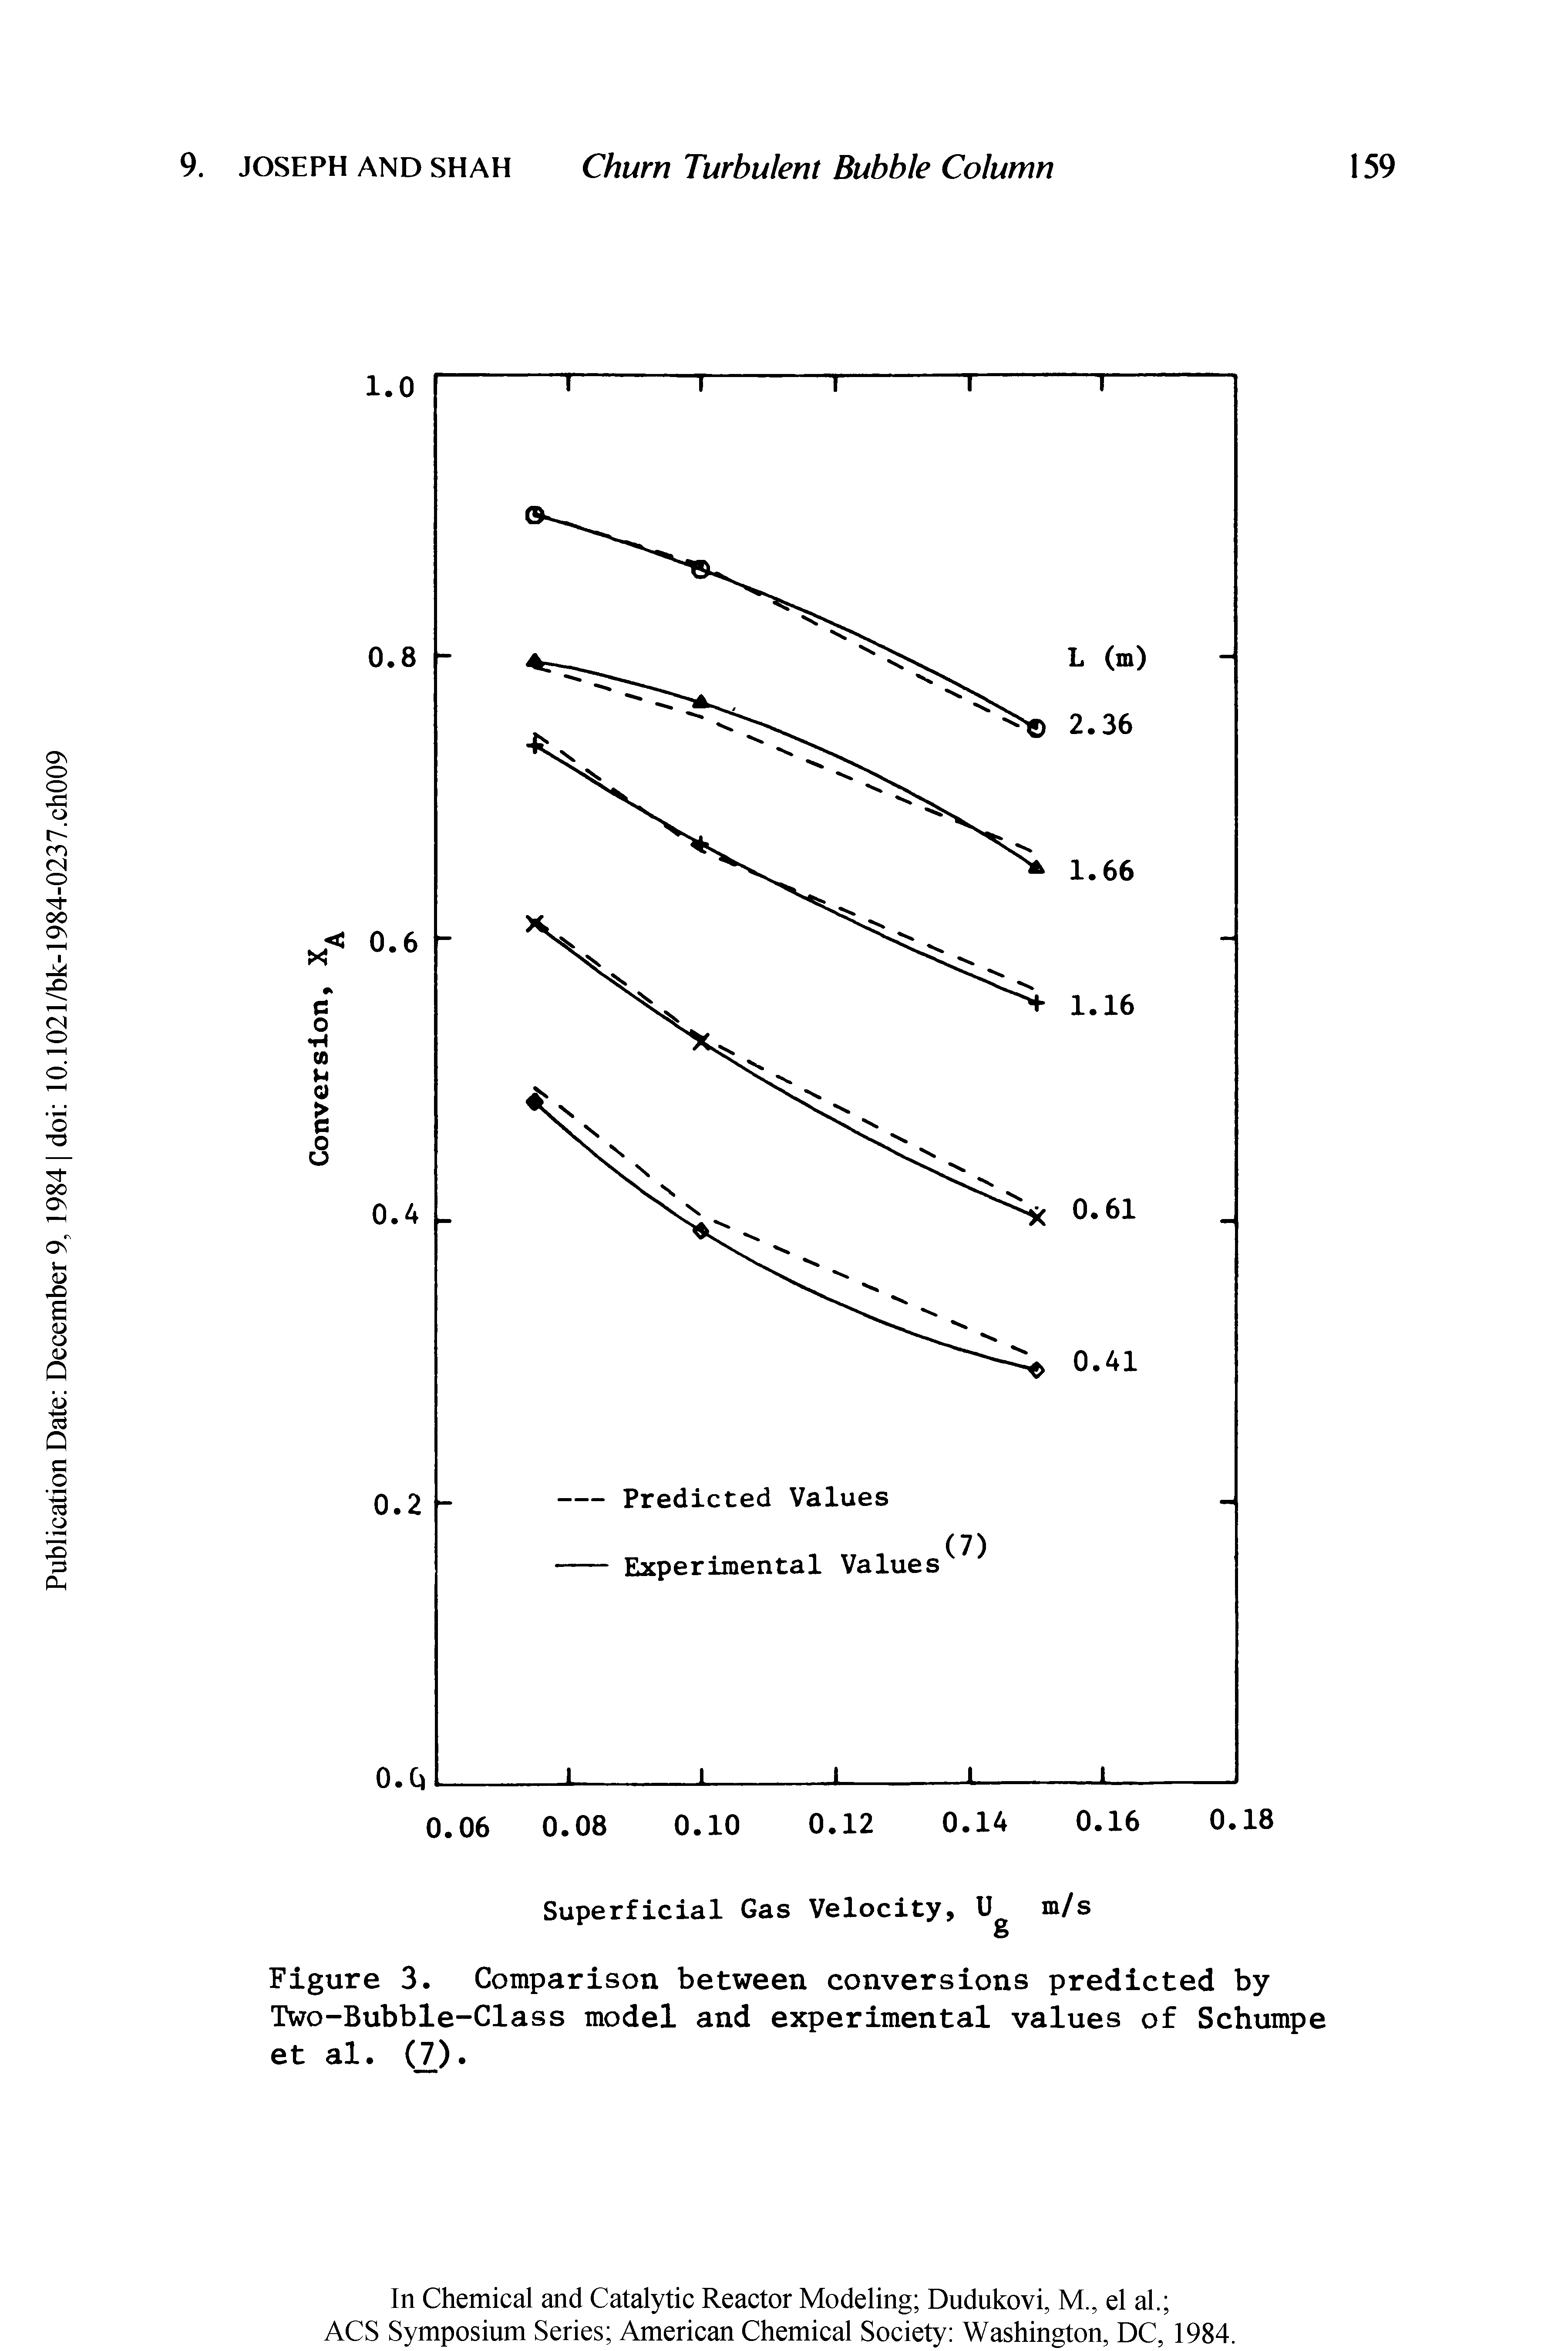 Figure 3. Comparison between conversions predicted by Two-Bubble-Class model and experimental values of Schumpe et al. (7).